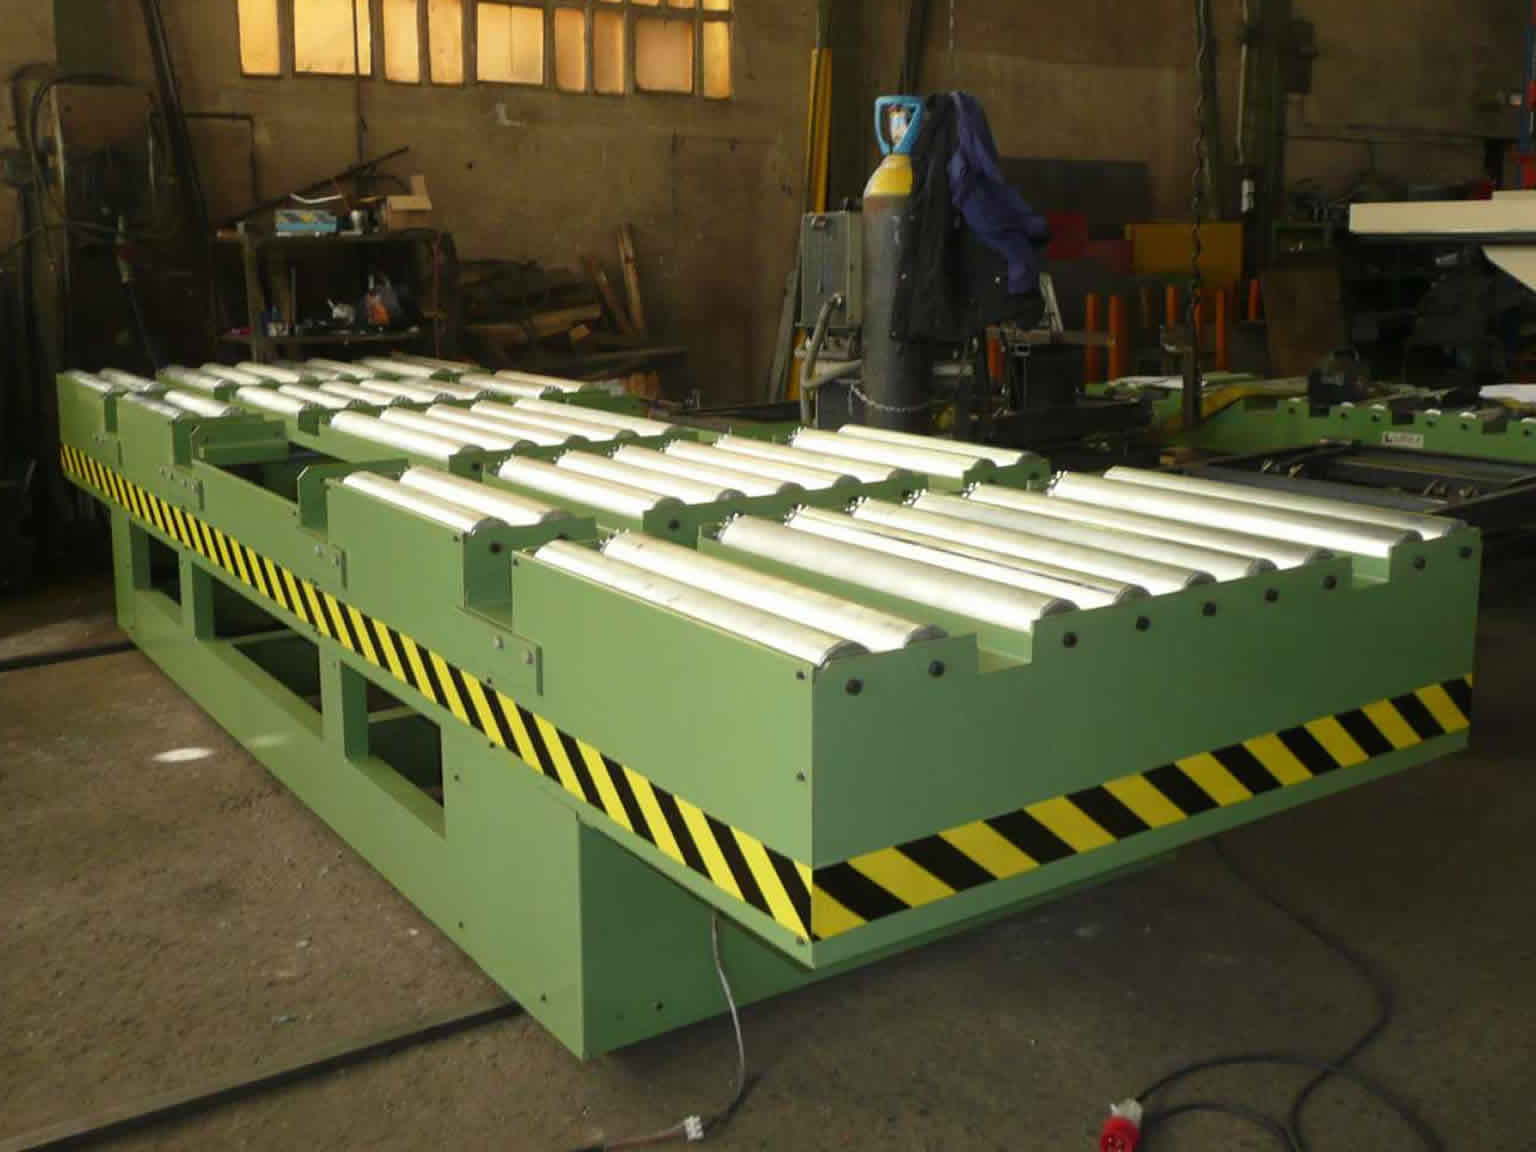 Design and assembly of roller conveyors for companies that need to transfer material, whether on pallets or not